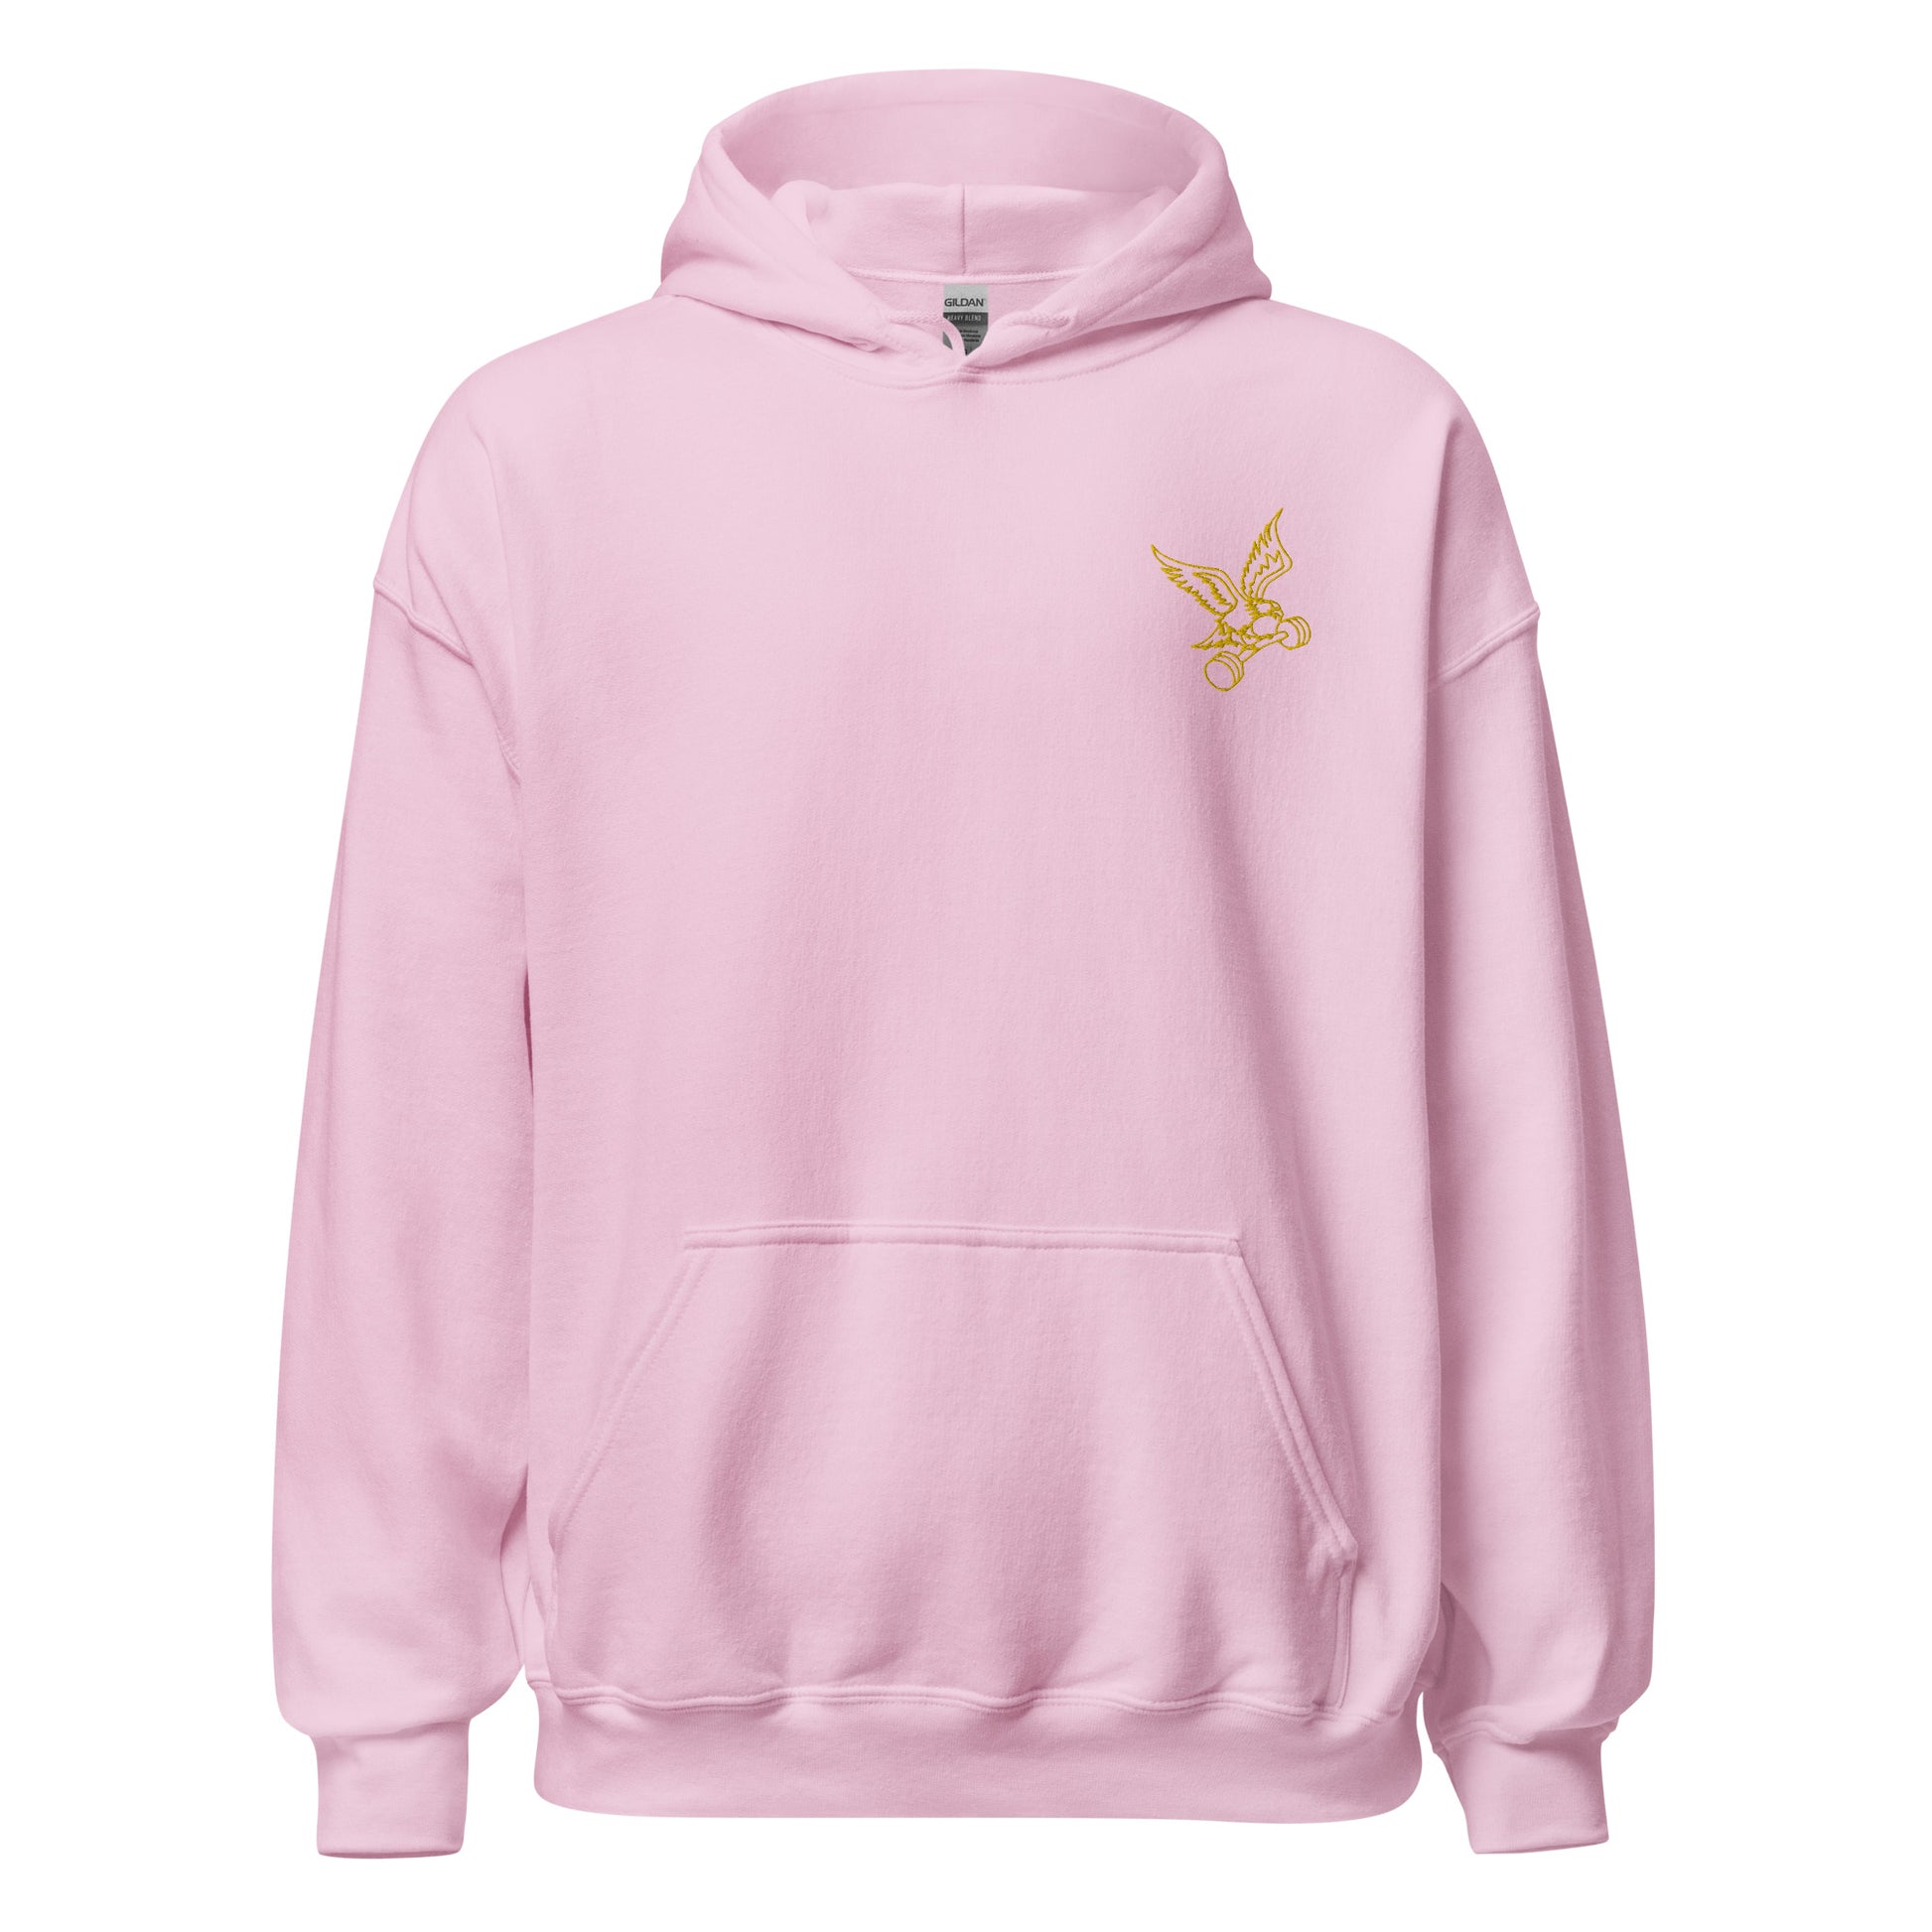 Embroidered Barbell Eagle Hoodie in Light Pink